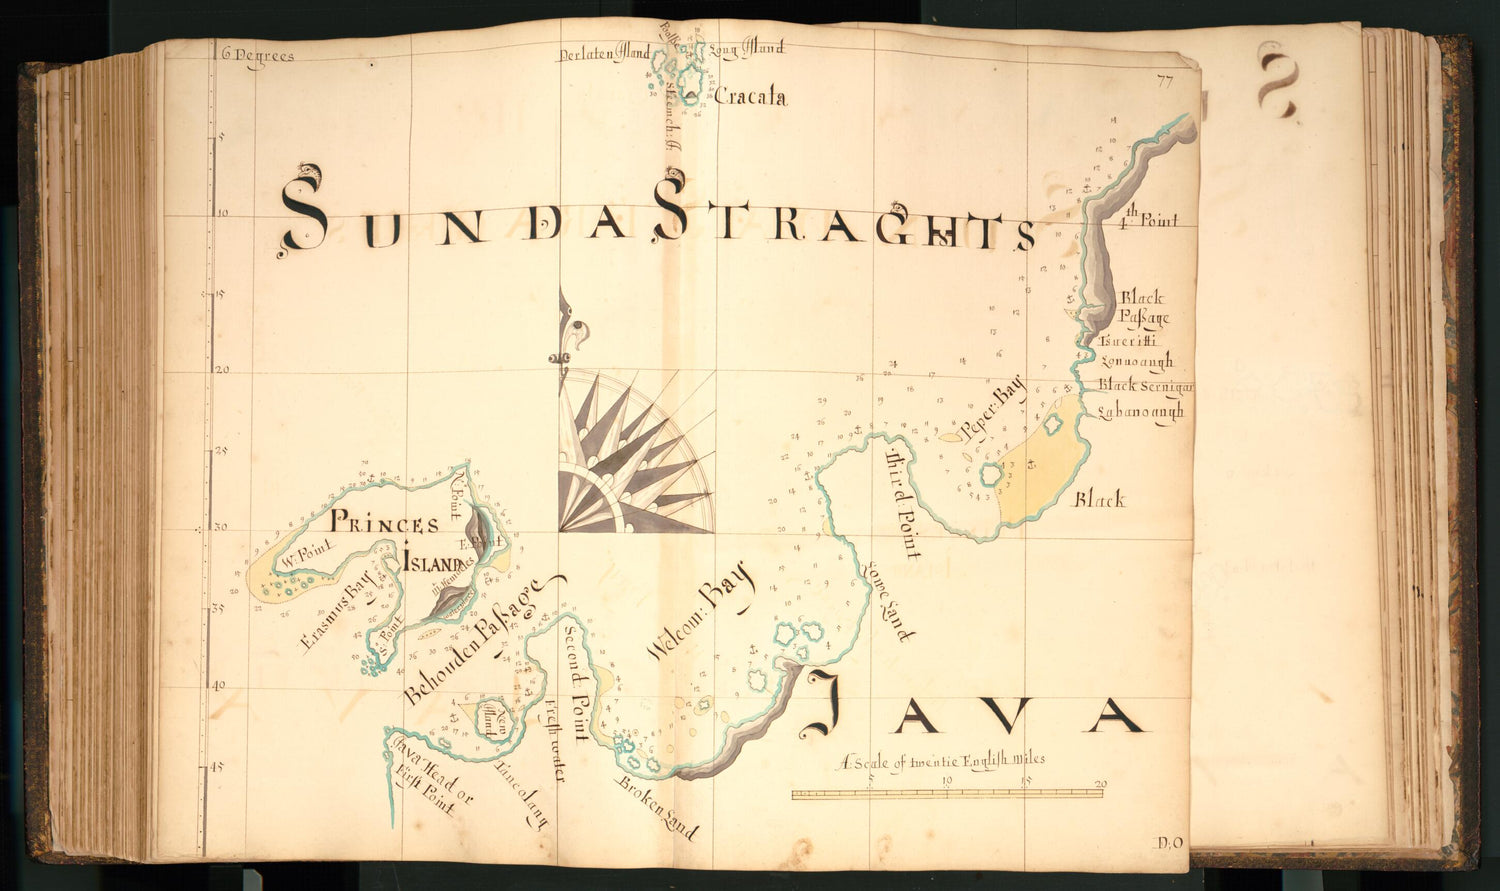 This old map of 77) Sunda Straghts, Java from Buccaneer Atlas from 1690 was created by William Hacke in 1690